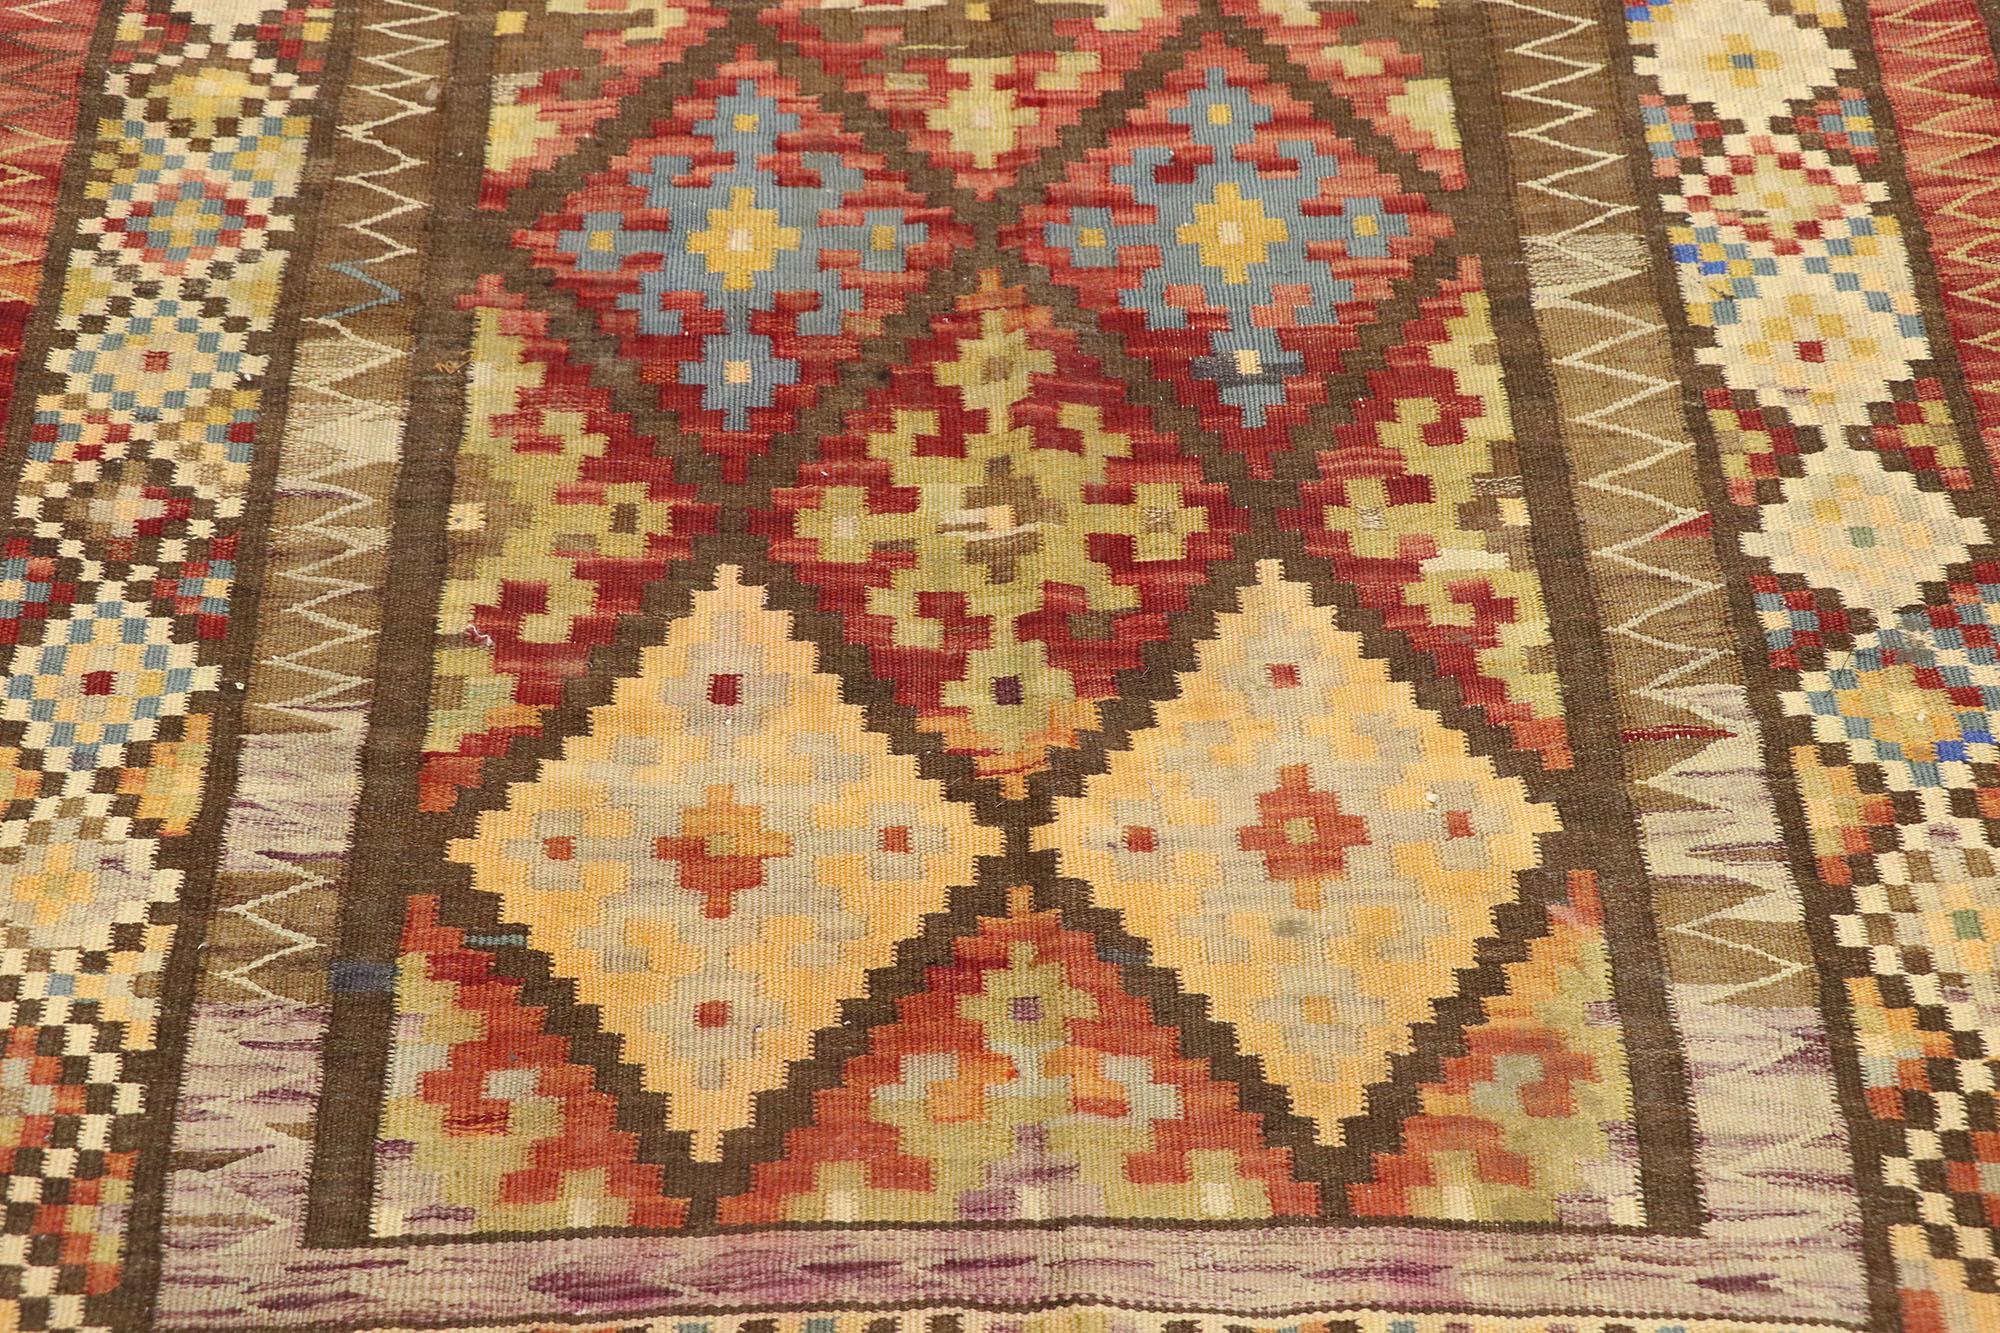 Vintage Persian Bijar Kilim Rug, Tribal Enchantment Meets Modern Desert Chic In Good Condition For Sale In Dallas, TX